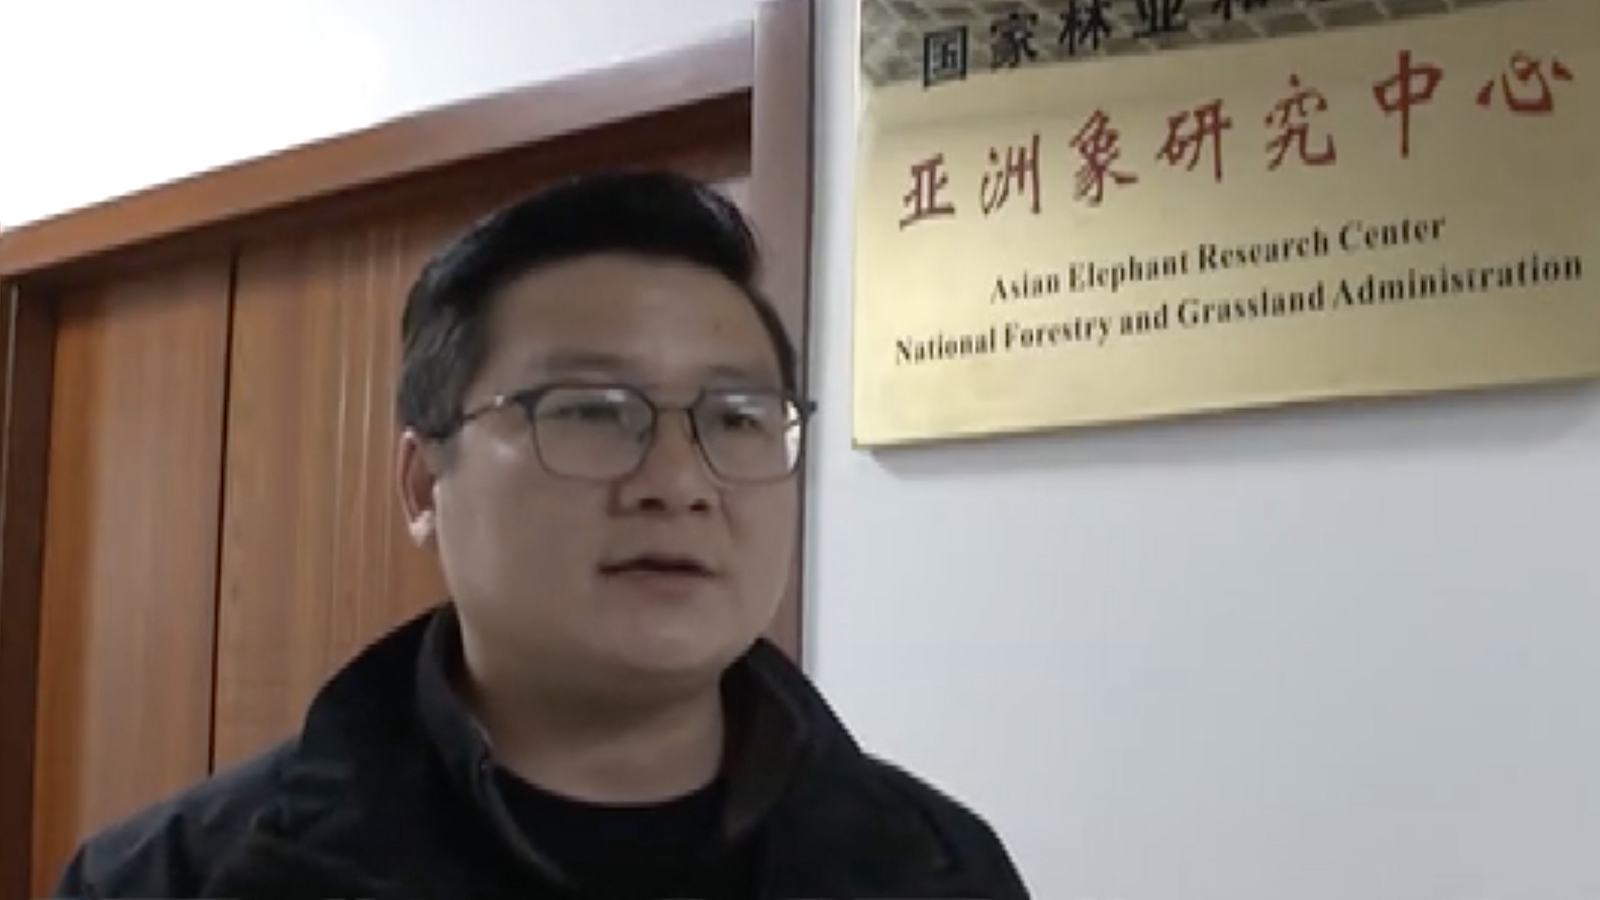 Chen Fei, director of the Asian Elephant Research Center under the National Forestry and Grassland Administration. /CMG